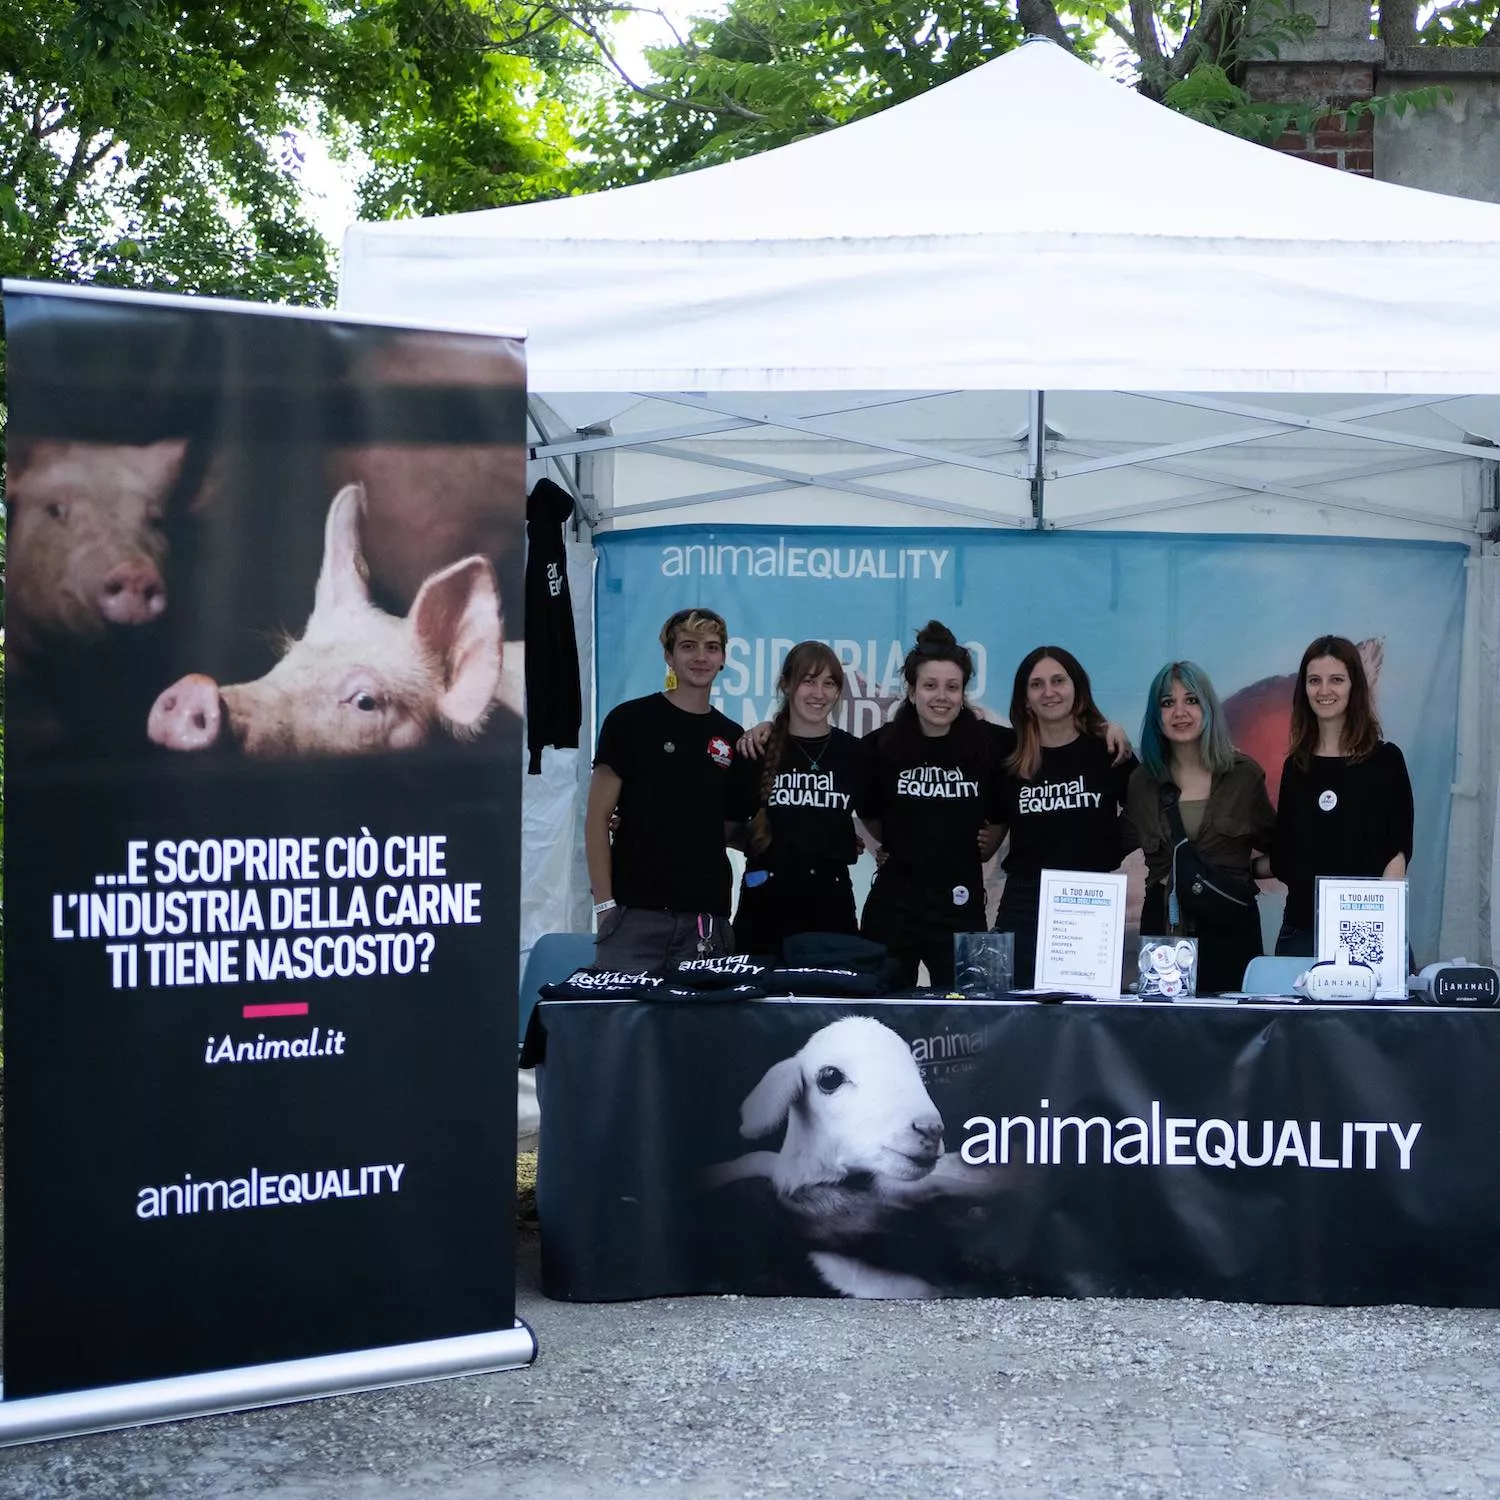 iAnimal at the Skate & Surf Film Festival in Italy